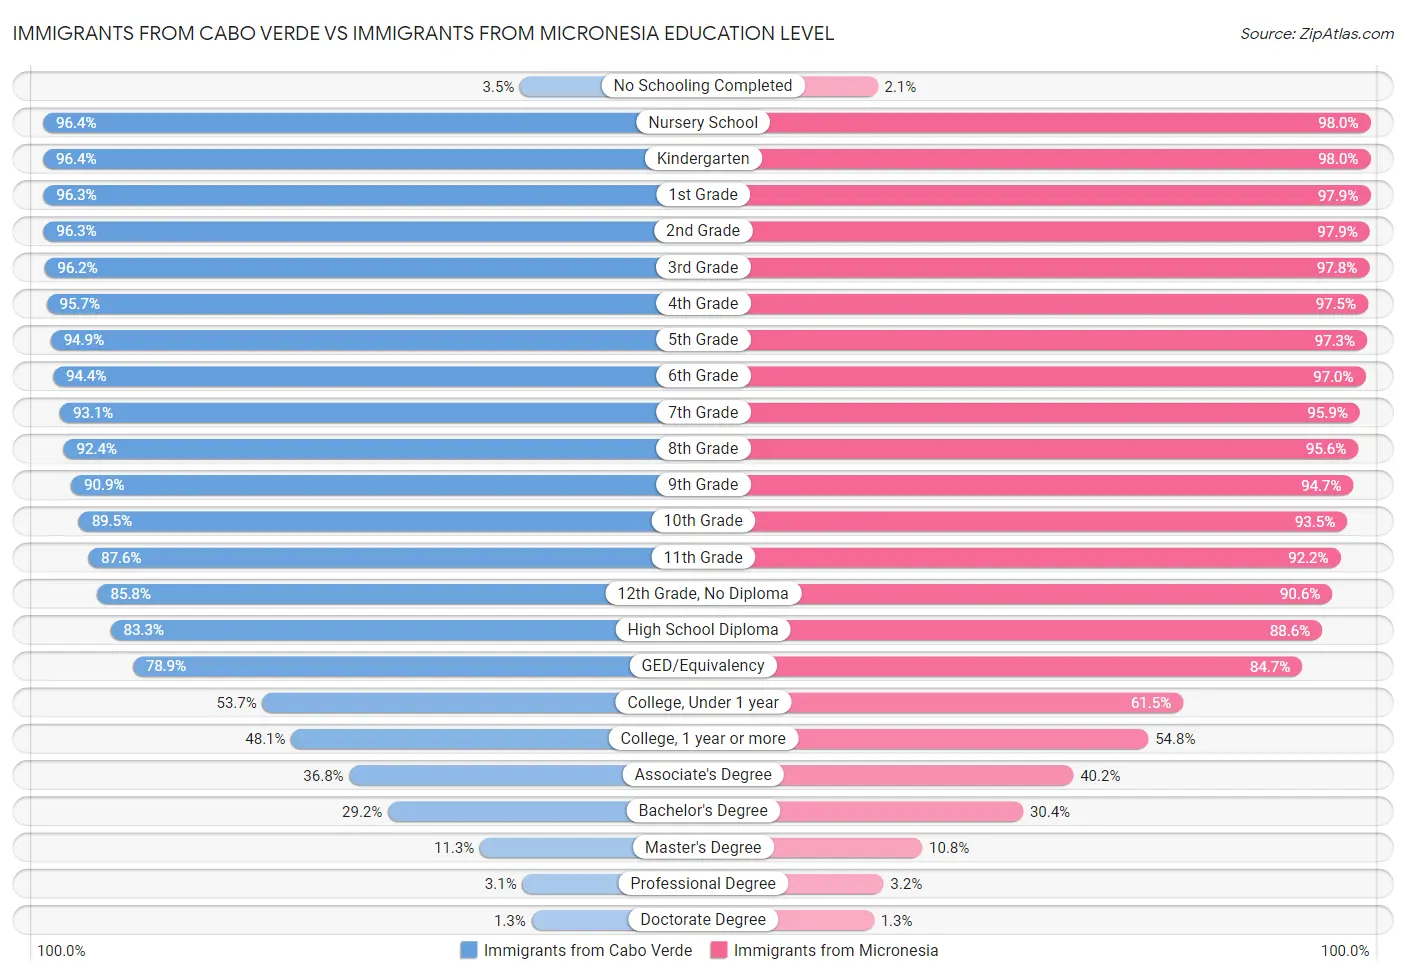 Immigrants from Cabo Verde vs Immigrants from Micronesia Education Level